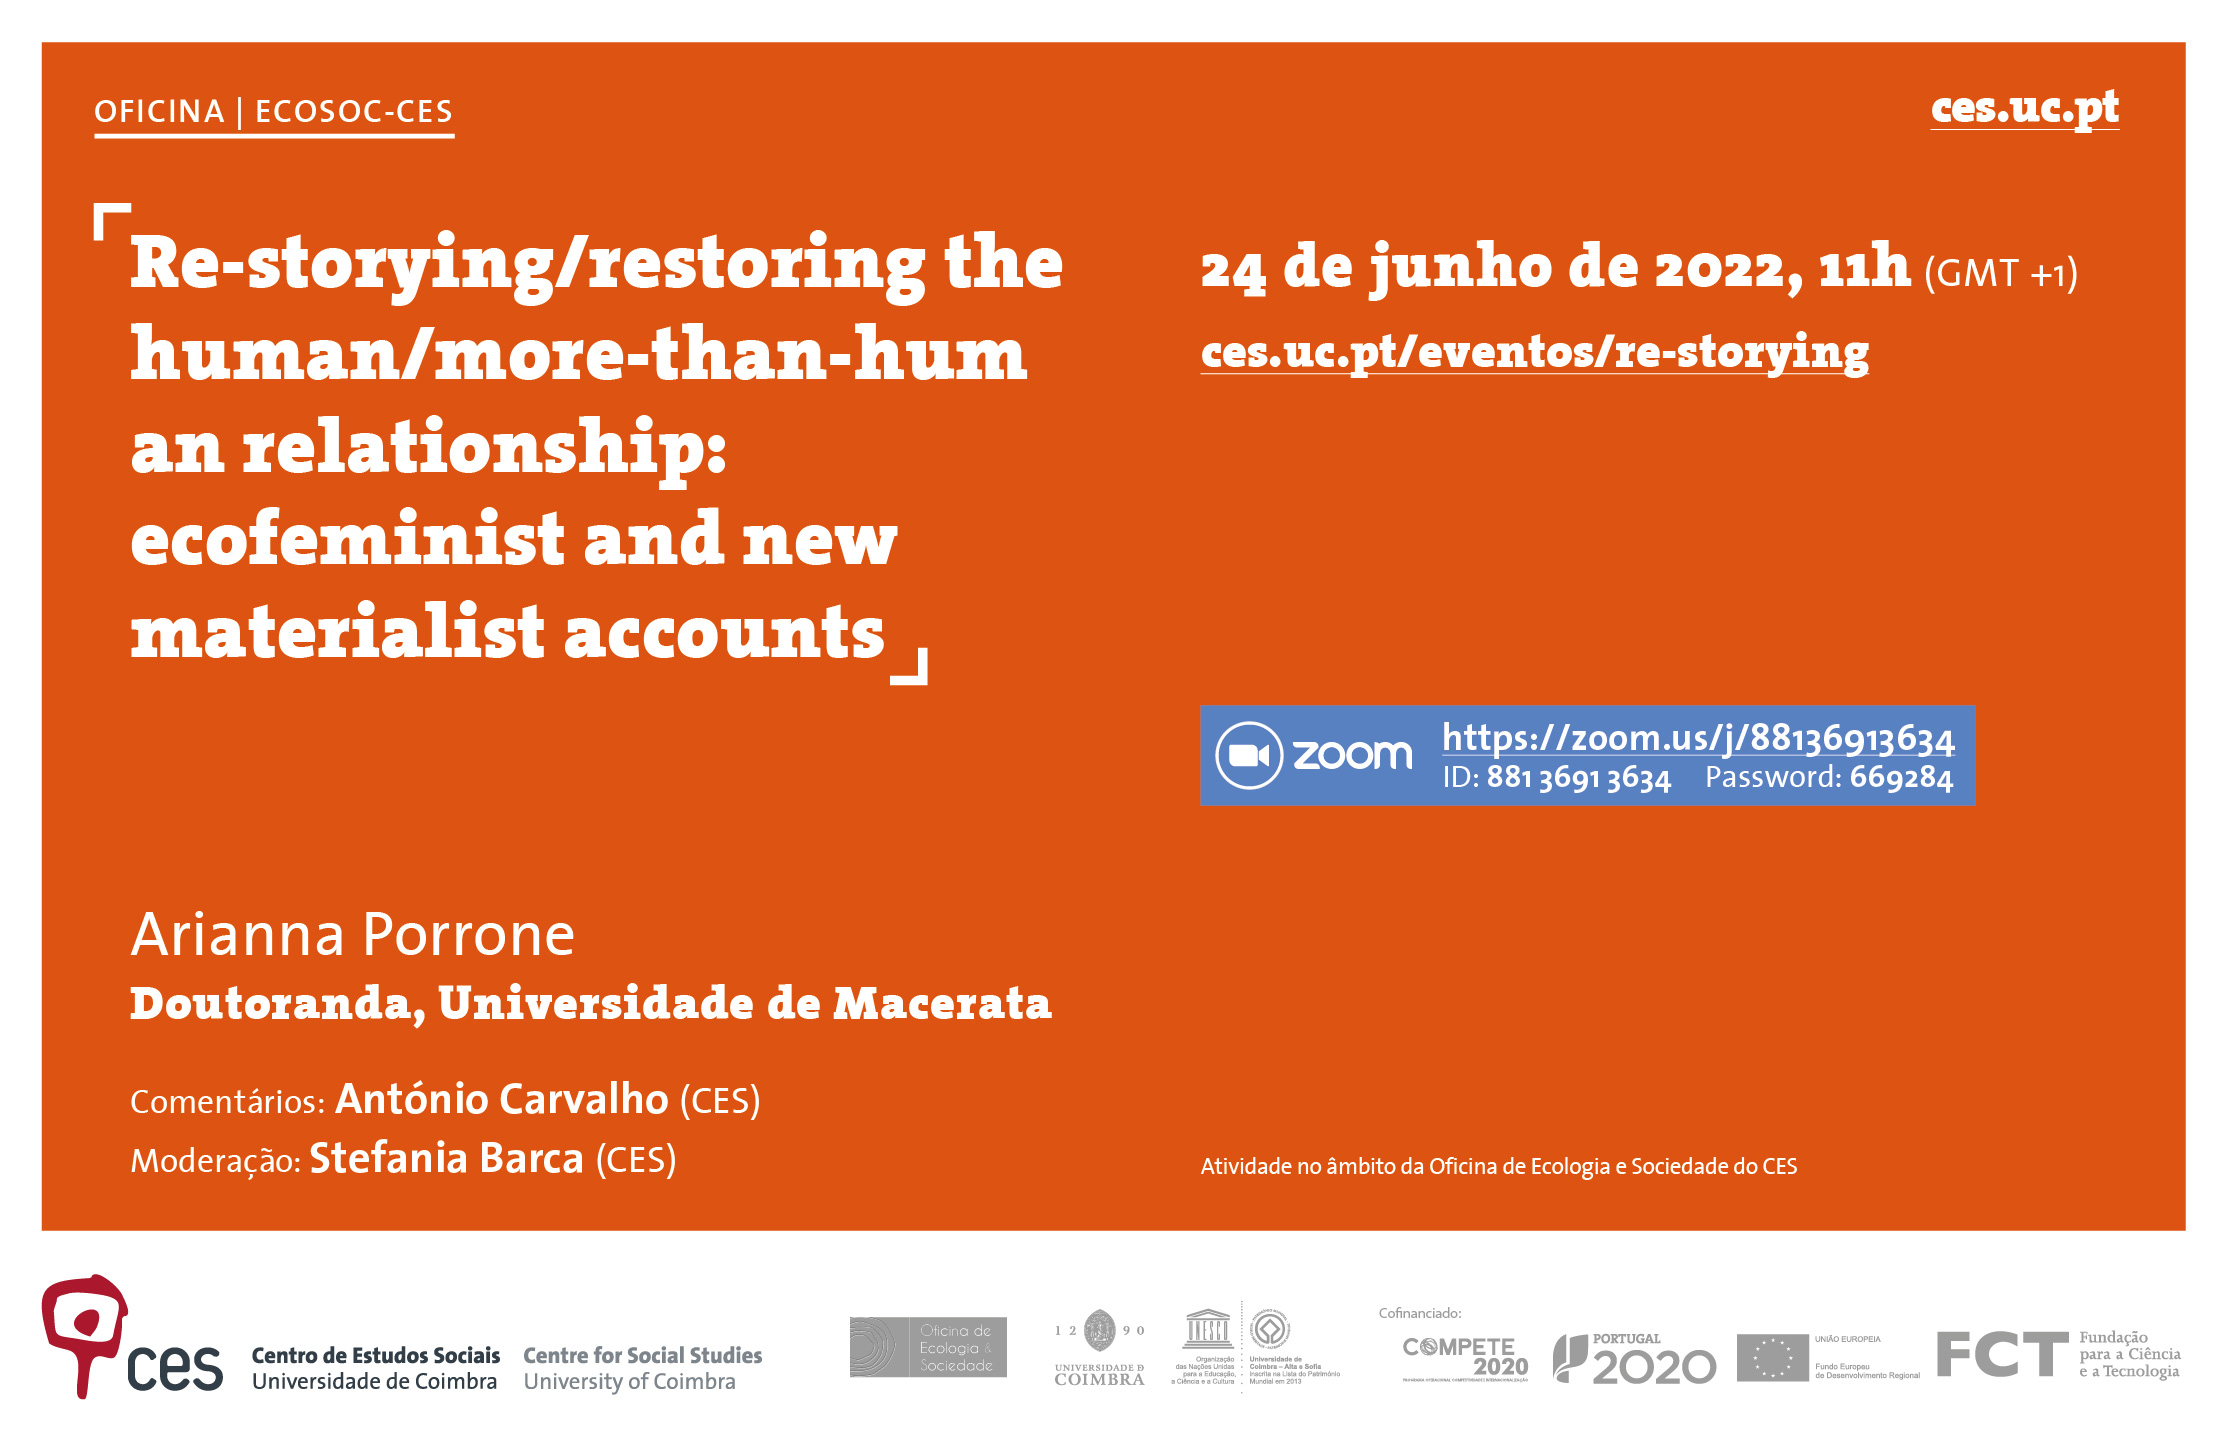 Re-storying/restoring the human/more-than-human relationship: ecofeminist and new materialist accounts<span id="edit_37897"><script>$(function() { $('#edit_37897').load( "/myces/user/editobj.php?tipo=evento&id=37897" ); });</script></span>